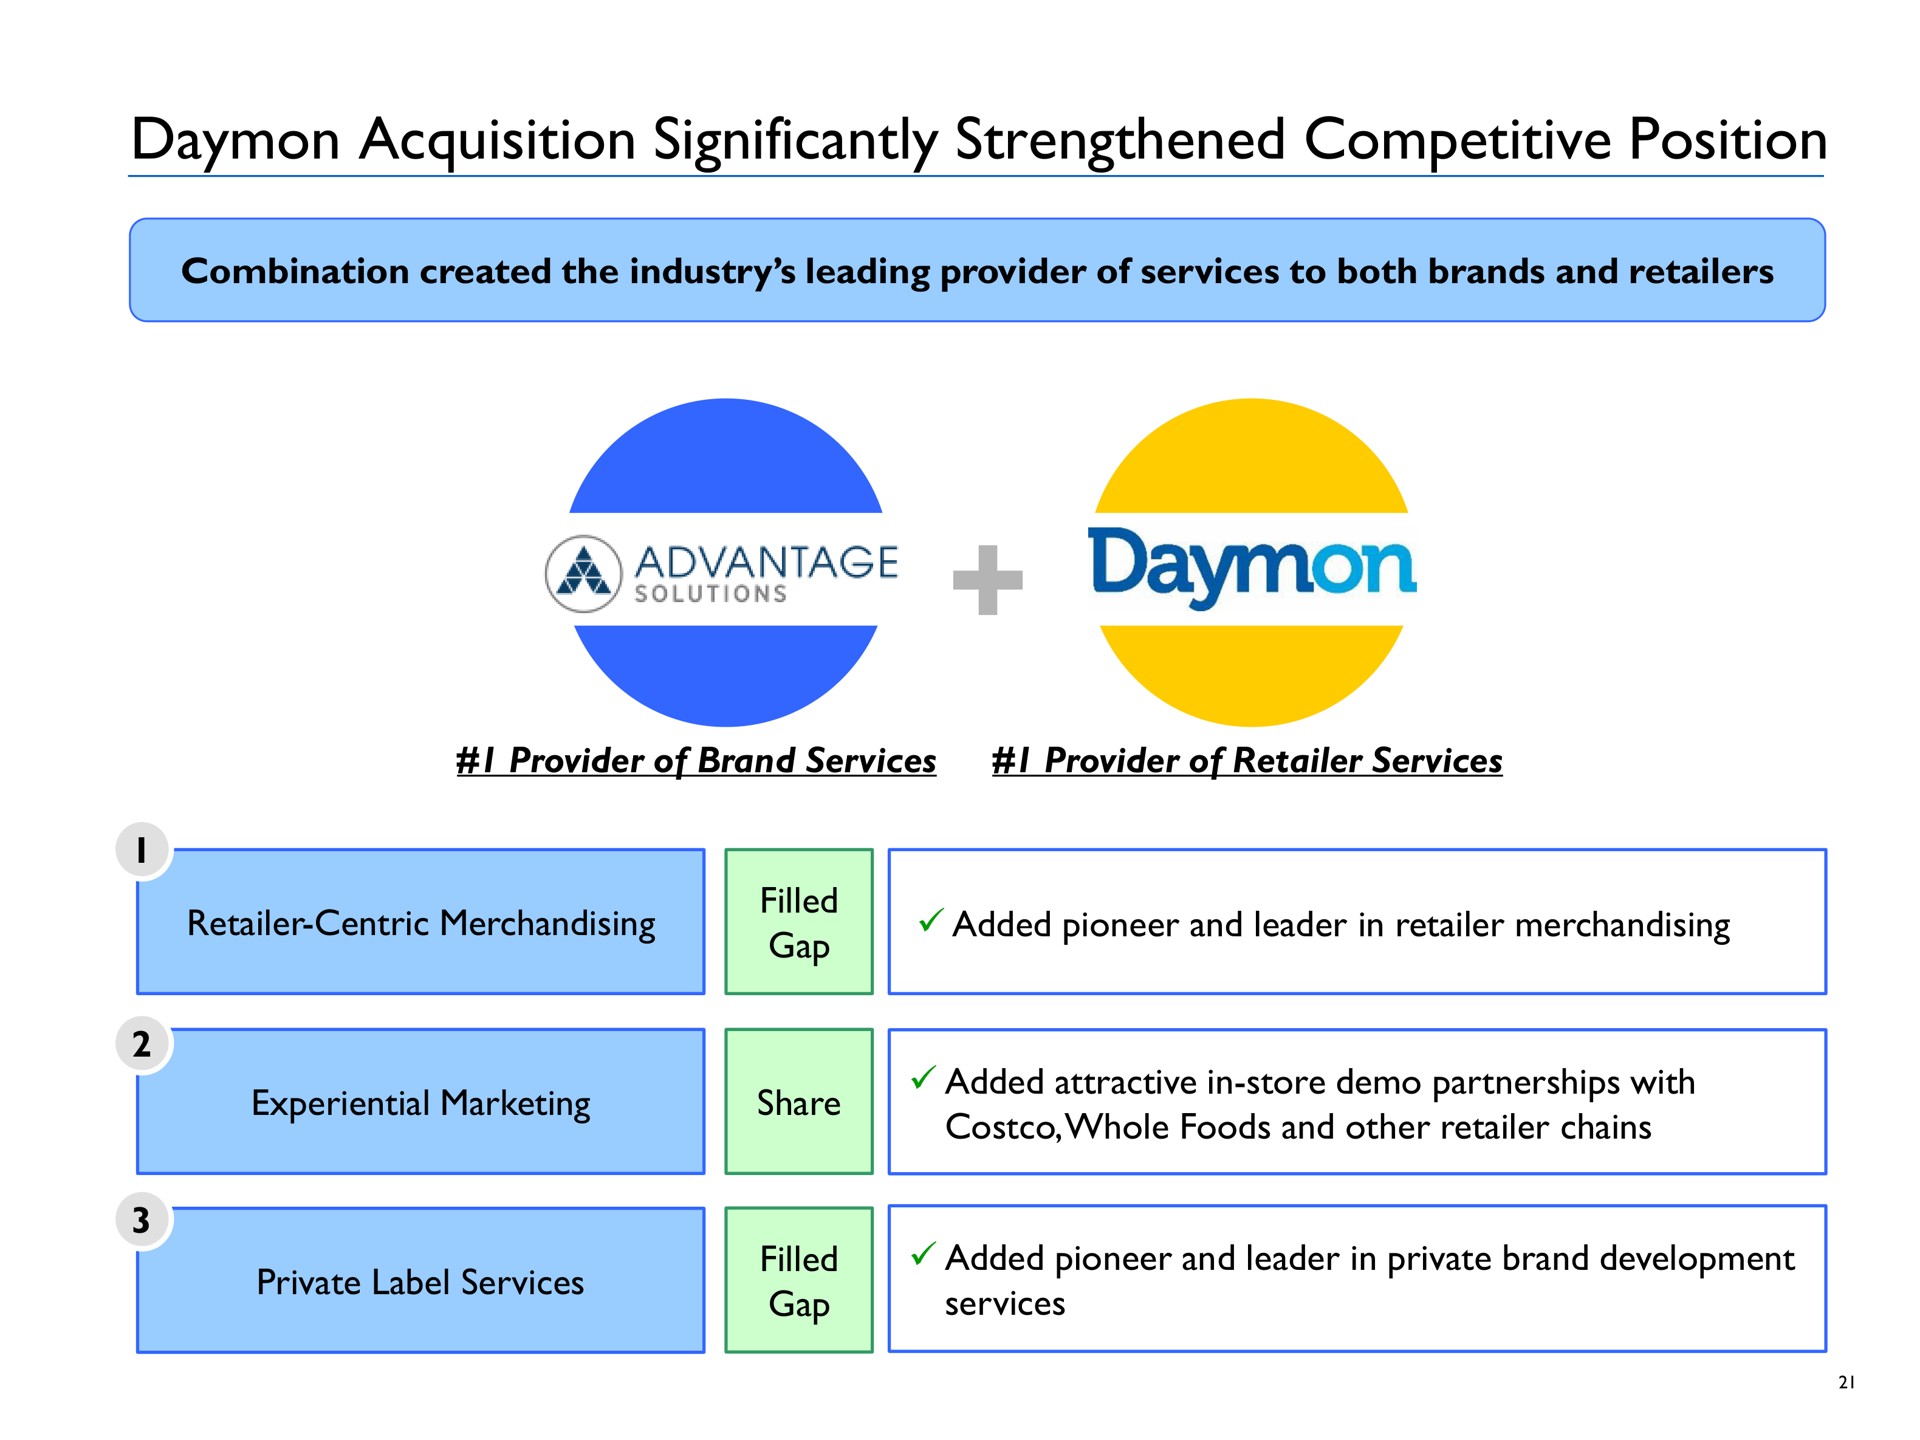 acquisition significantly strengthened competitive position a advantage | Advantage Solutions